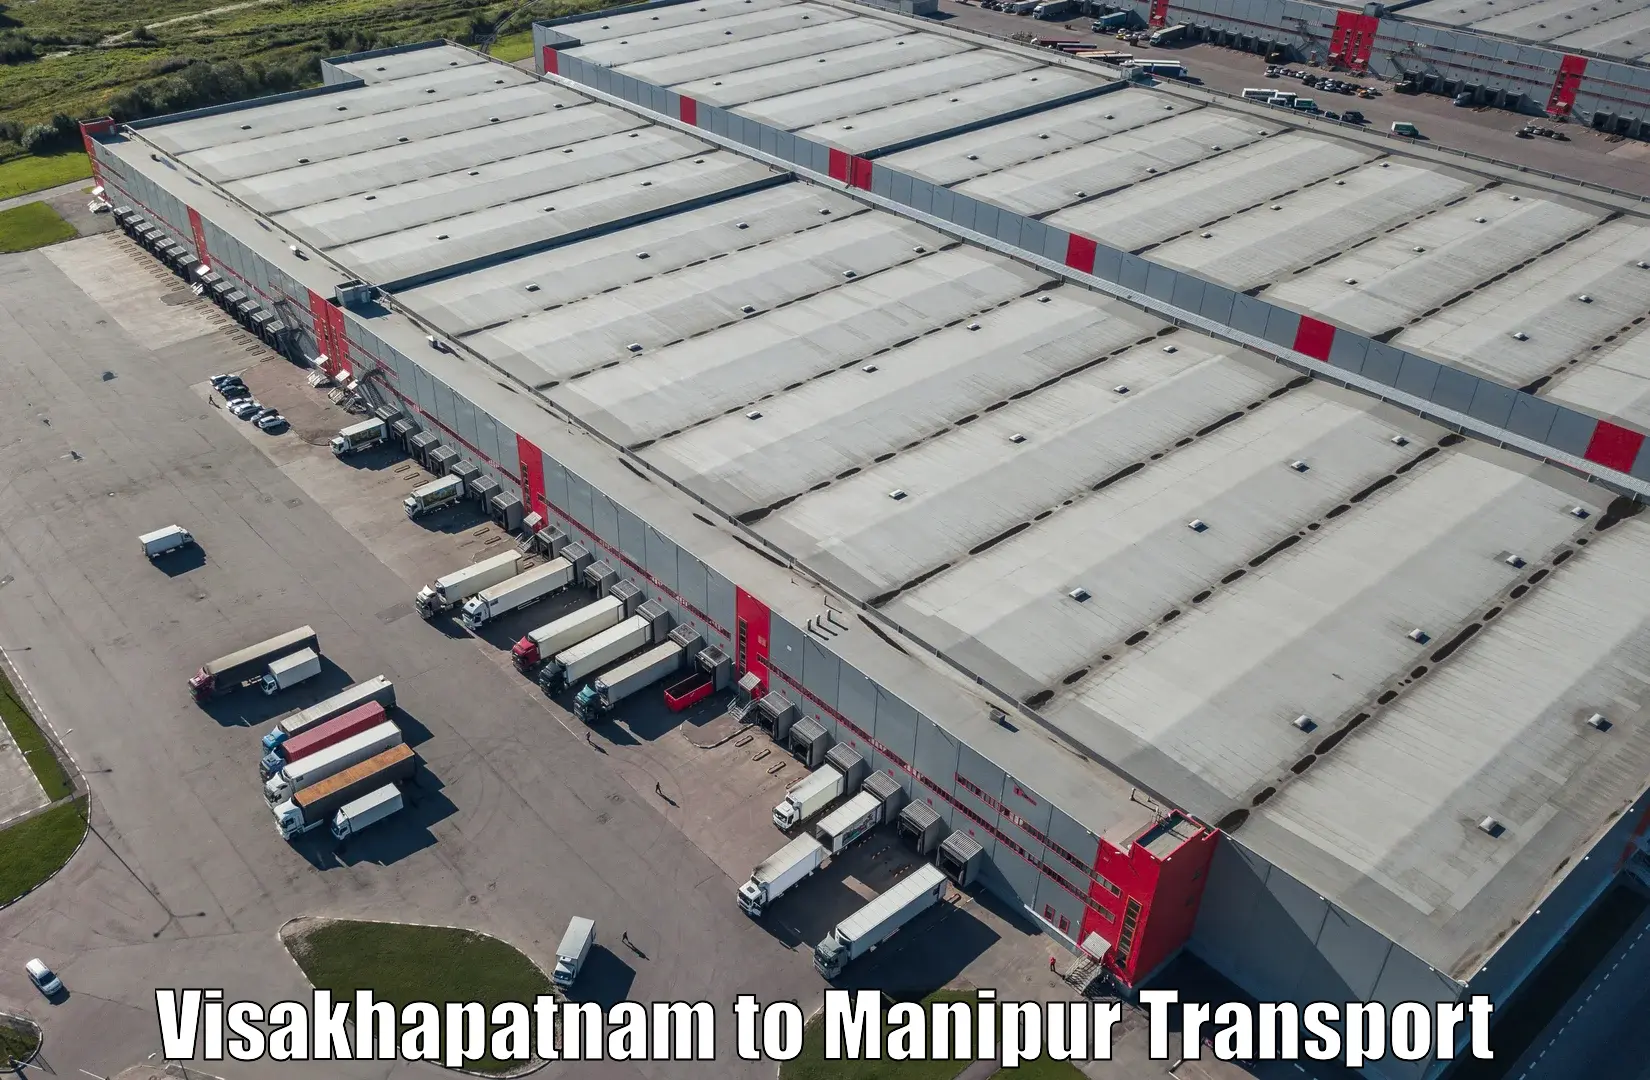 Express transport services in Visakhapatnam to Tadubi